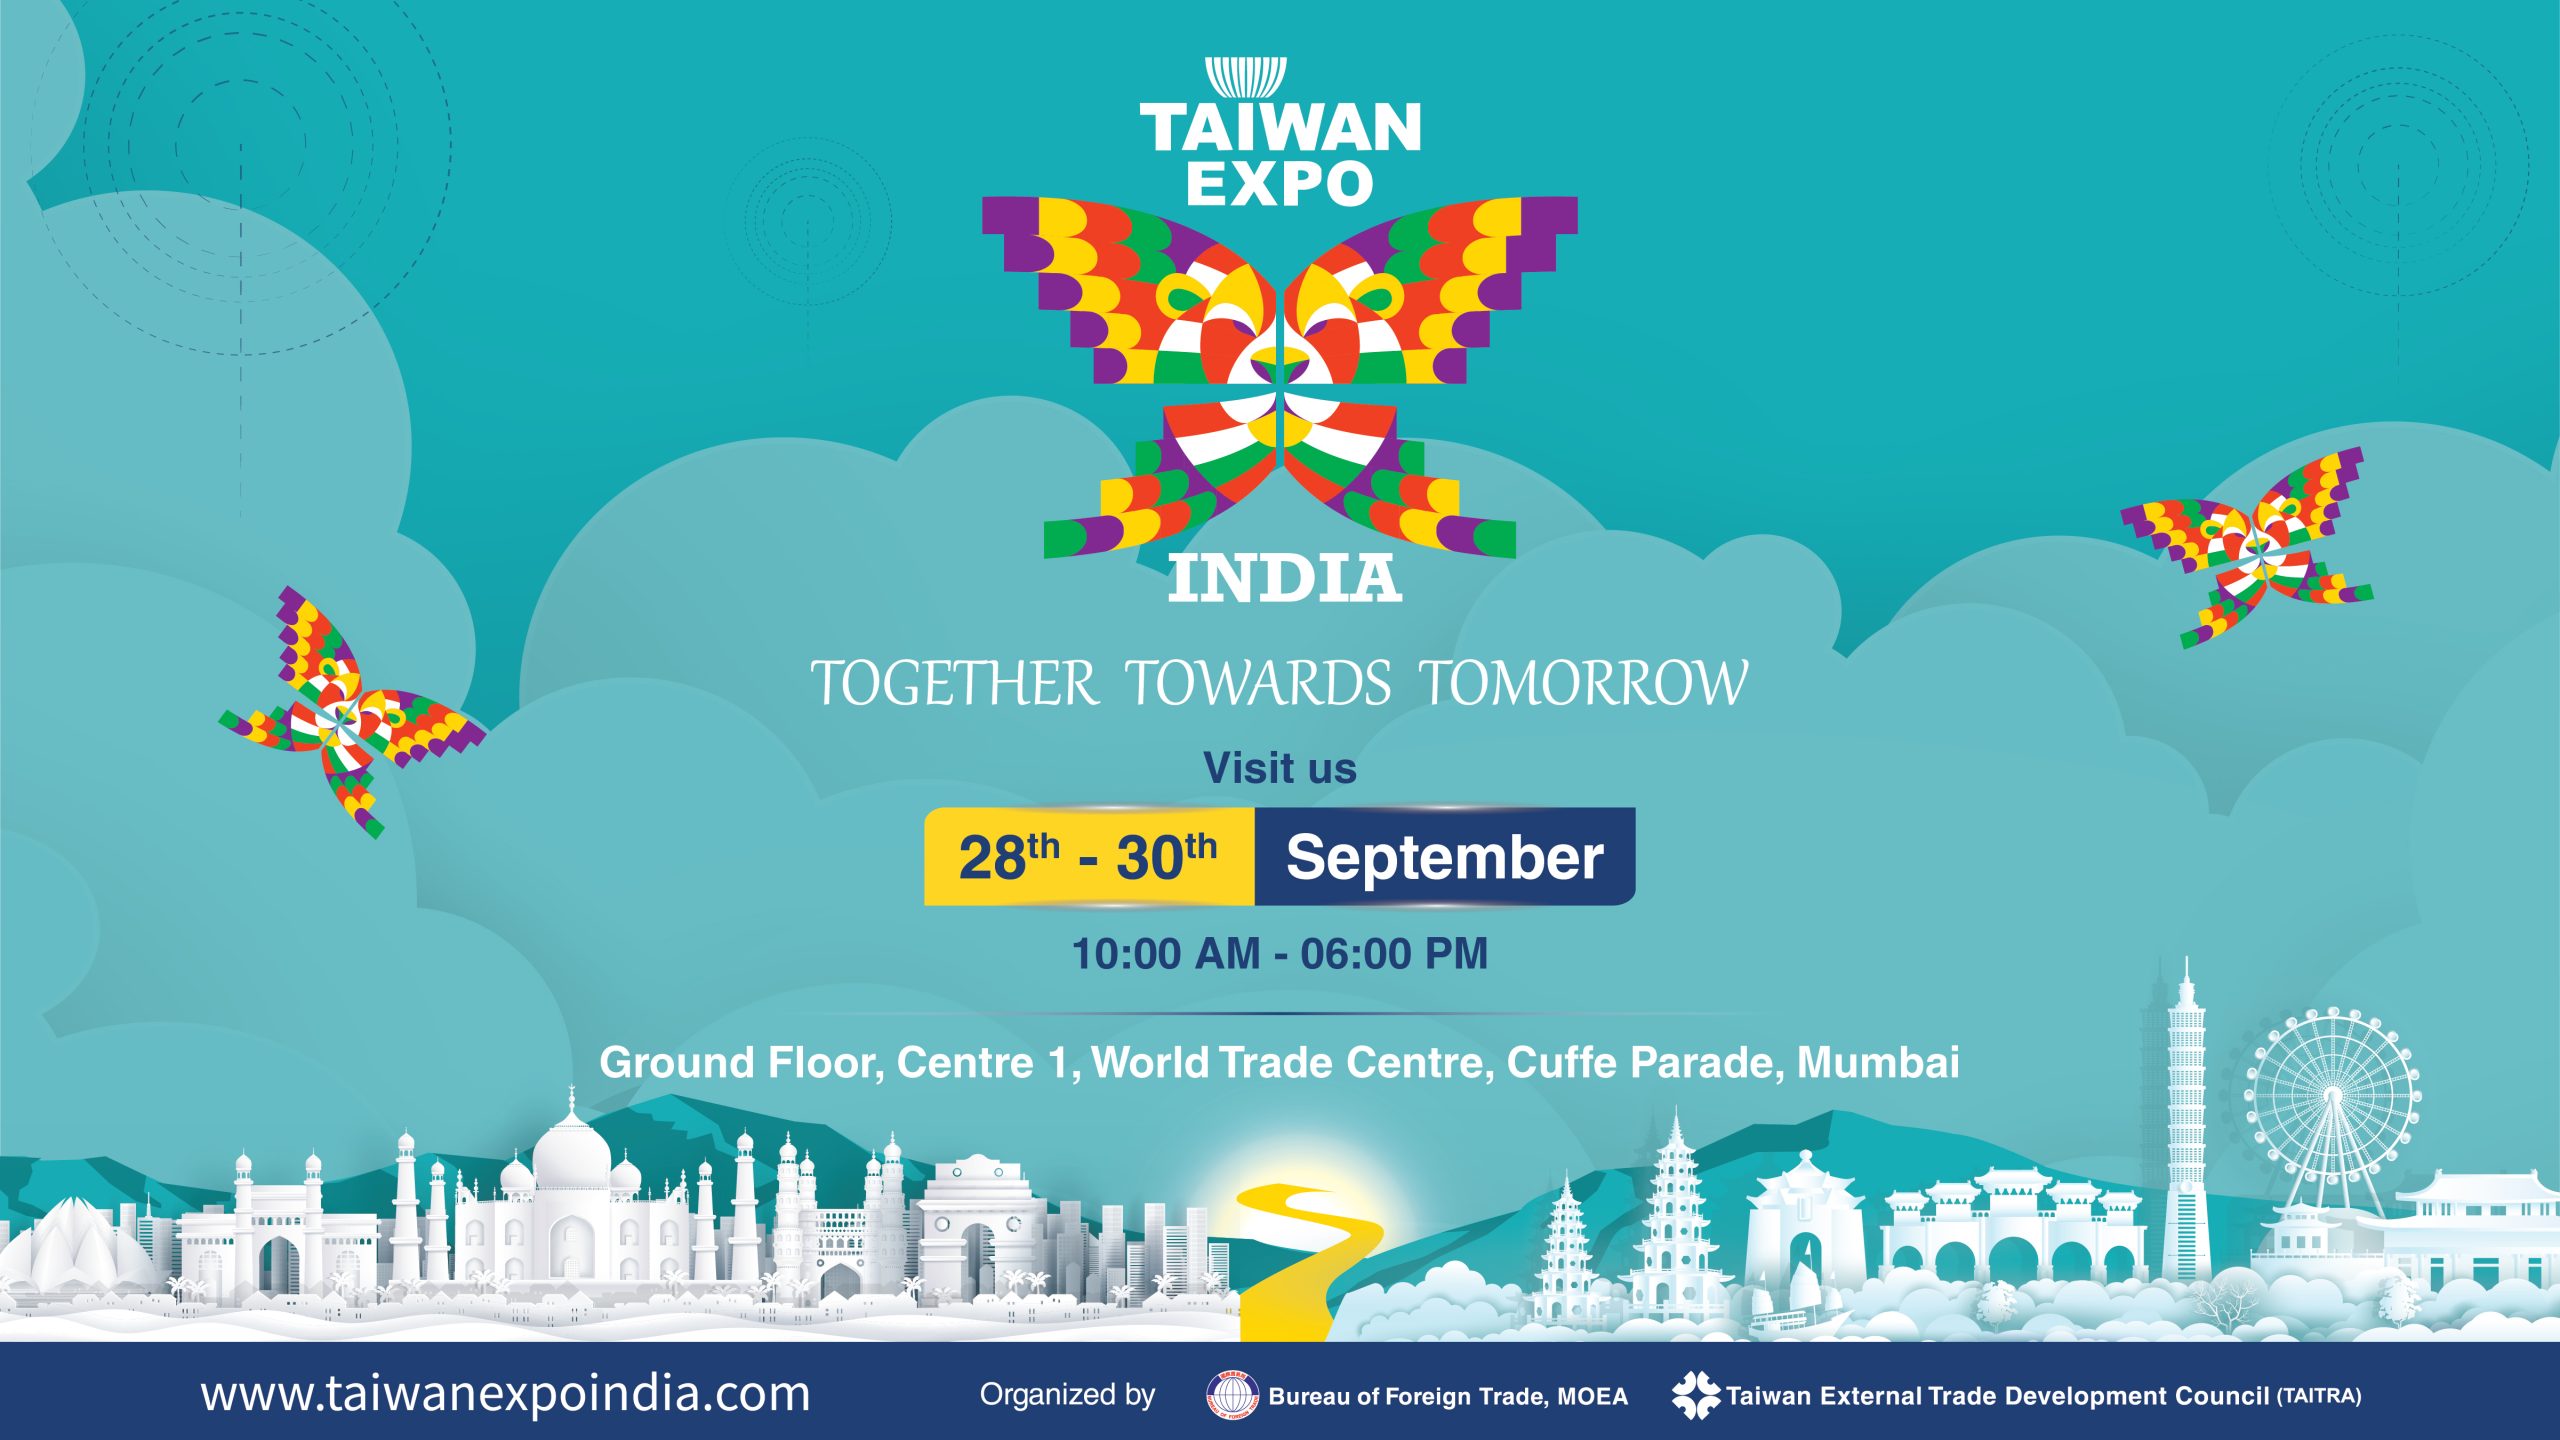 [News] - Taiwan Expo 2022 is expected to open doors between India and Taiwan